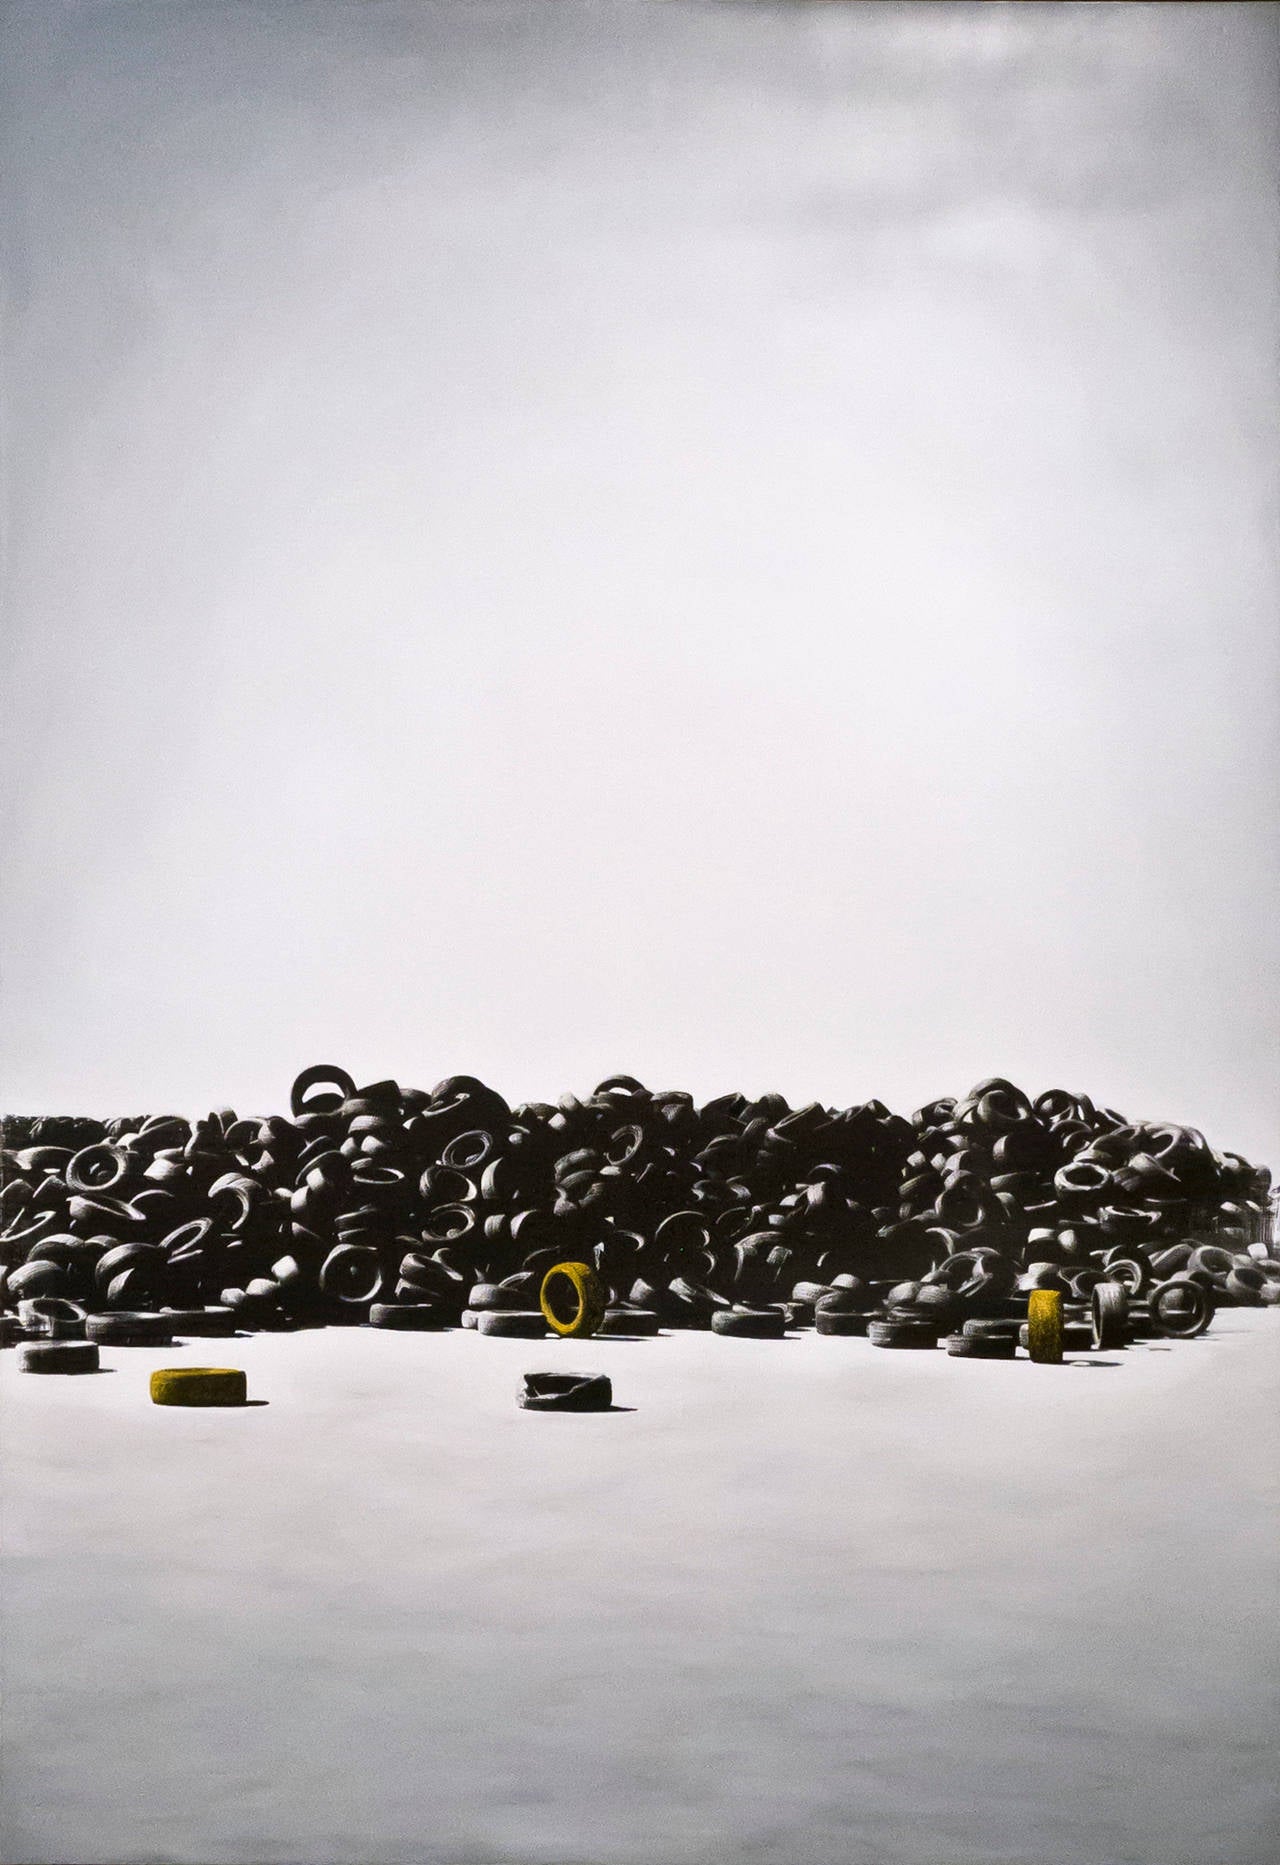 Tire Pile 7, 2015
Mixed media and oil on canvas
71 x 49 inches